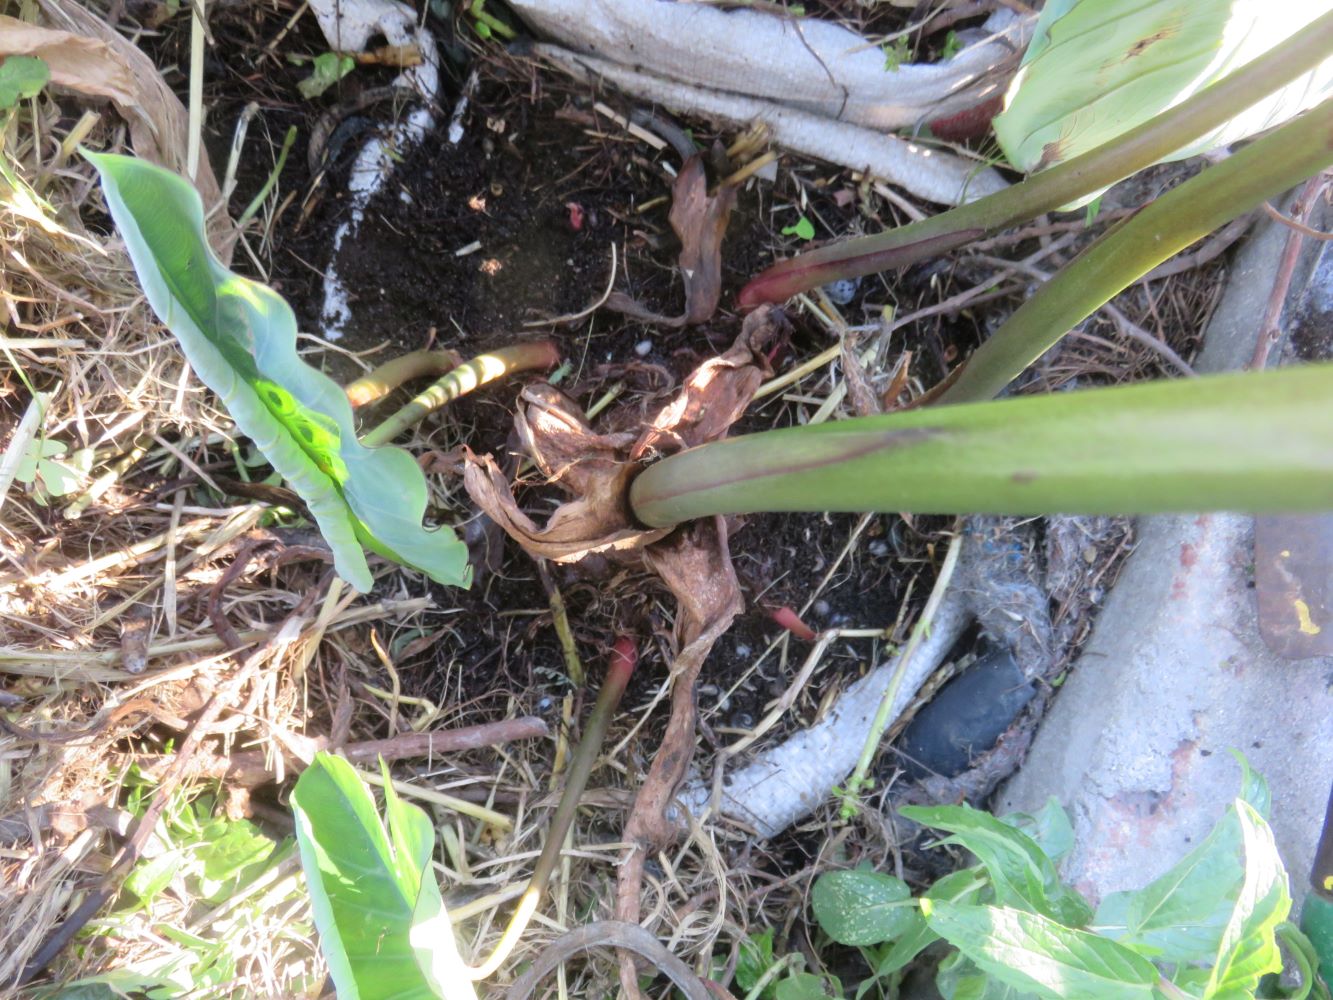 Stripping away the thick mulch I found a thick main stem and many pink or green side shoots.